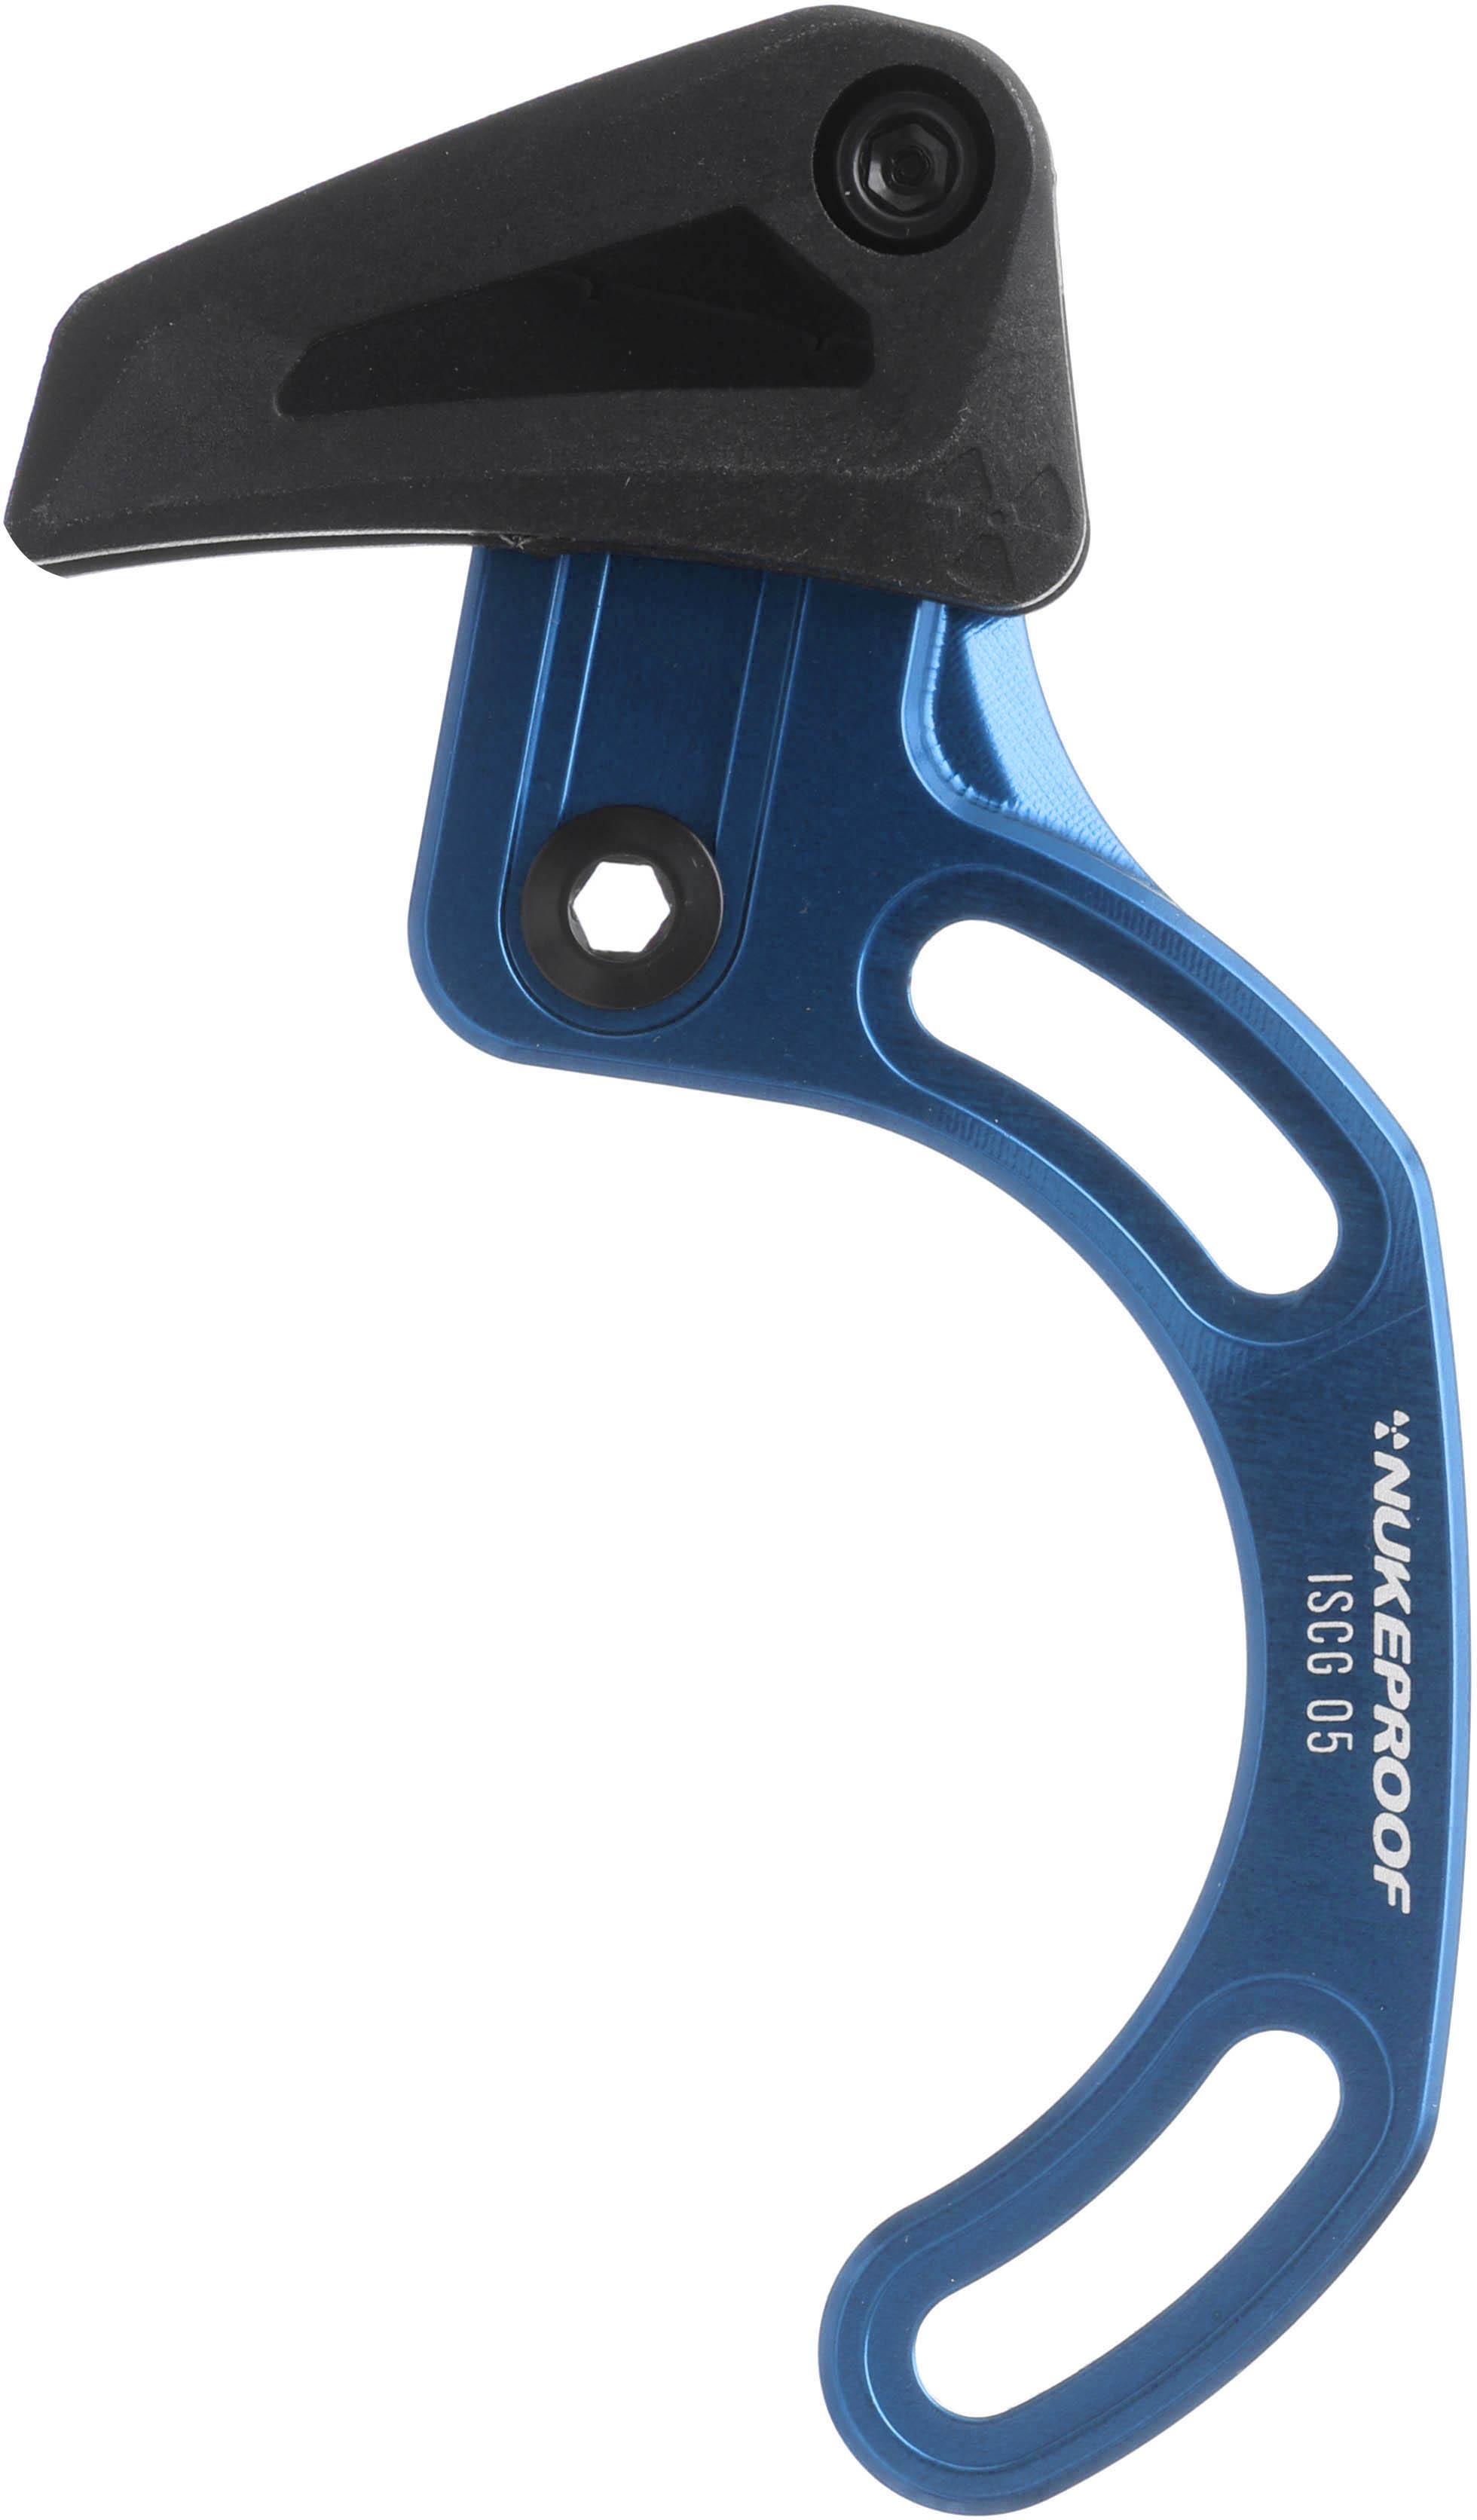 Nukeproof Chain Guide Iscg 05 Top Guide  Blue/black